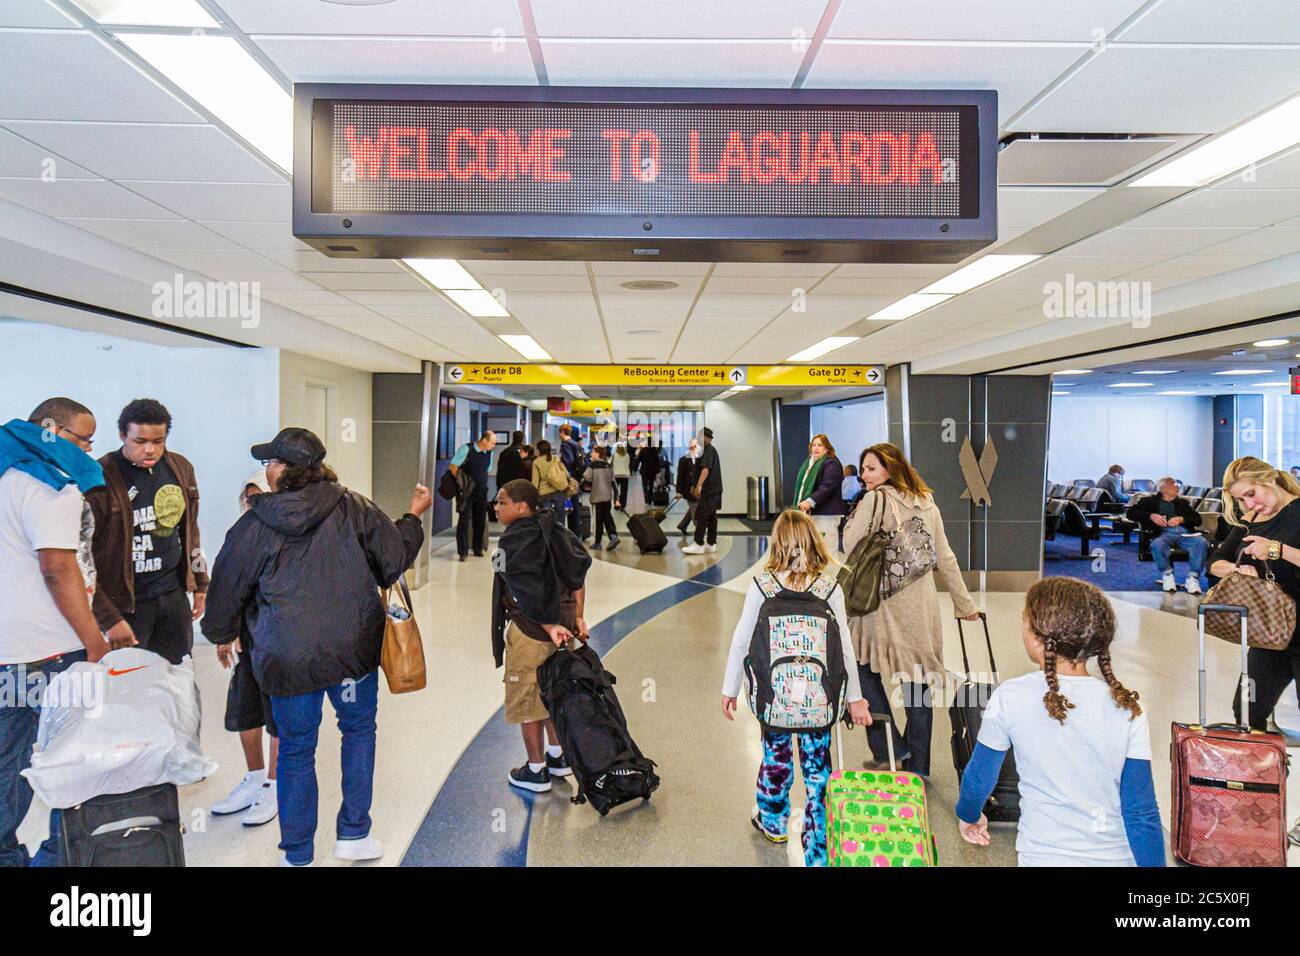 New York City,NYC NY Queens,LaGuardia Airport,LGA,terminal gate,passenger passengers rider riders,welcome LED sign,Black man men male adult adults,wom Stock Photo